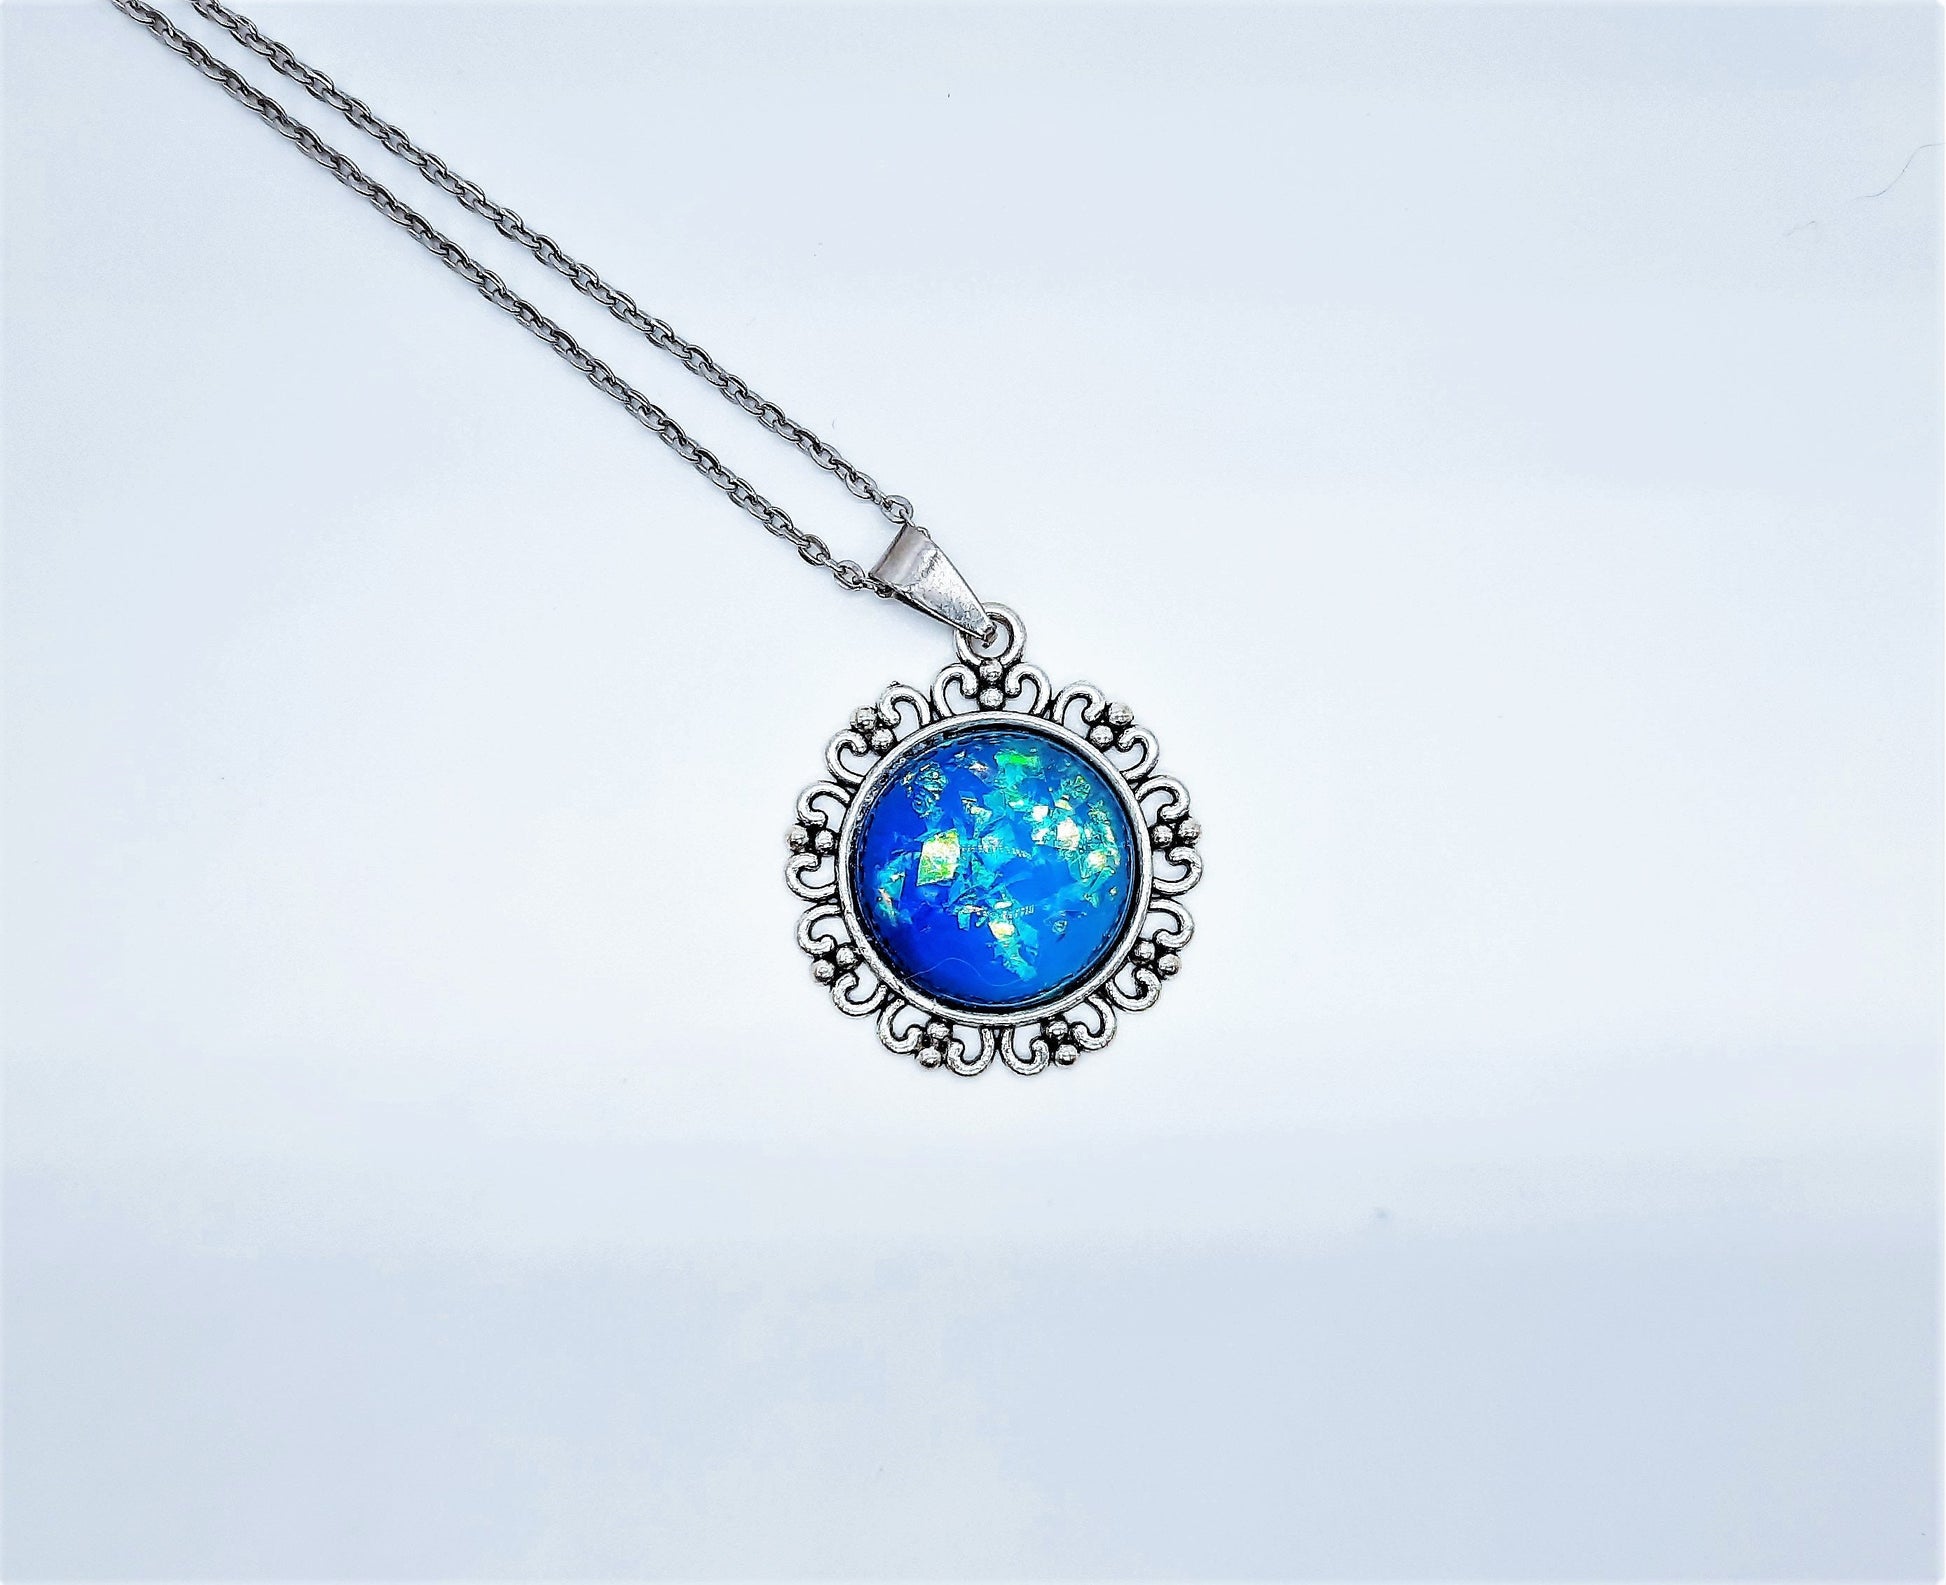 Translucent Glittery Blue Tibetan Style Pendant Necklace - Stainless Steel - Hypoallergenic - Glass Cabochon